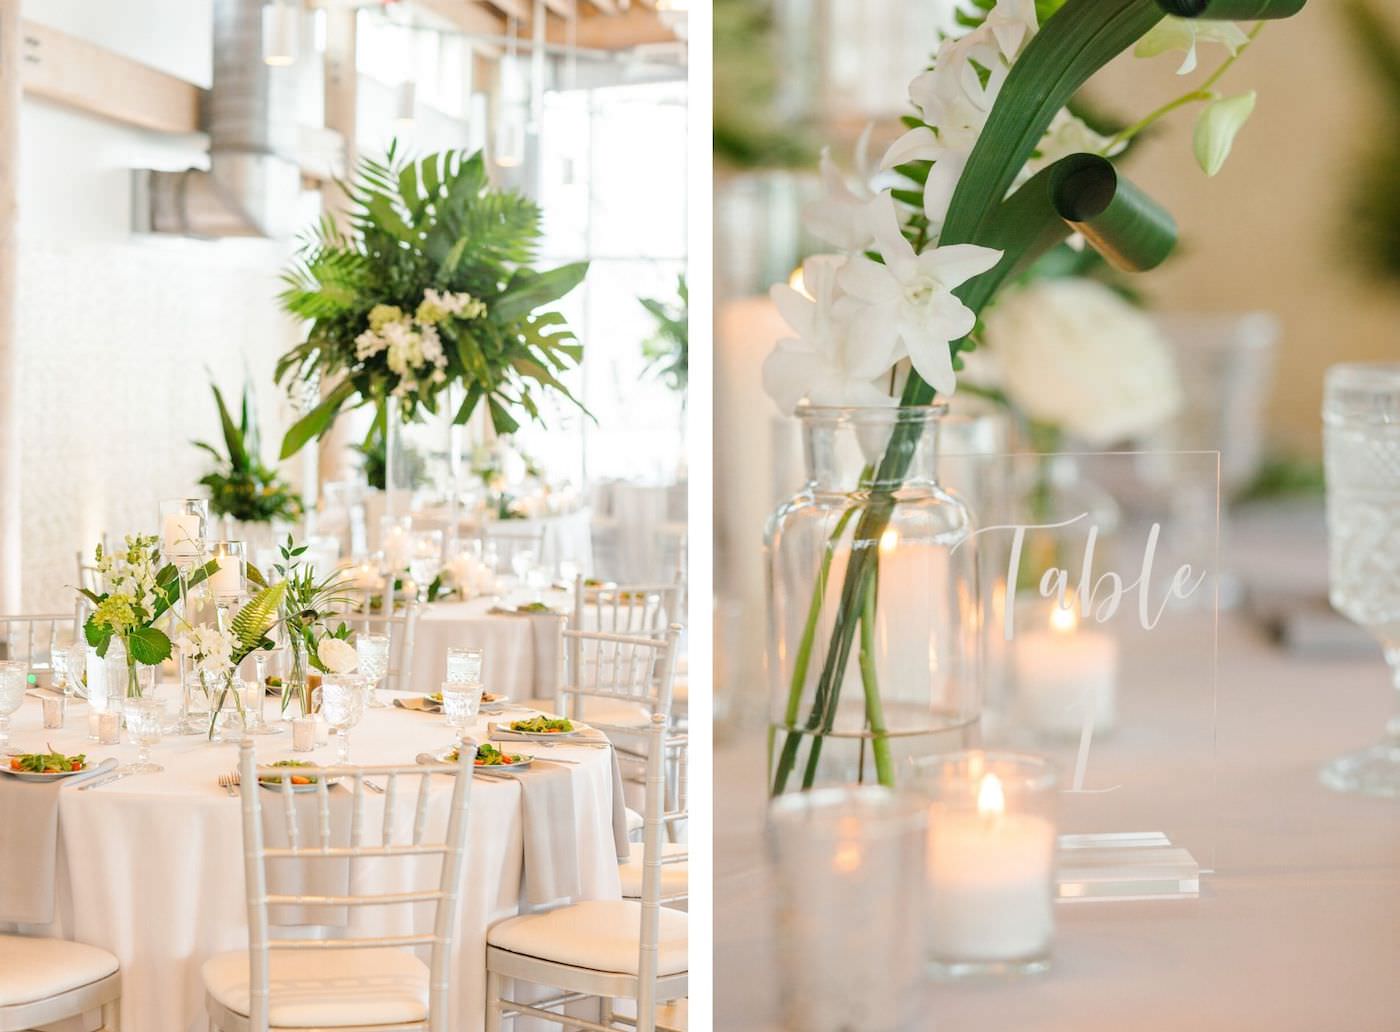 Tropical Tampa Florida Wedding Reception | White Wedding Table with Silver Chiavari Chairs and Grey Napkins and Tropical Palm Leaf Centerpiece with White Orchids | Tampa Wedding Florist Bruce Wayne Florals | Clear Acrylic Table Number with Calligraphy